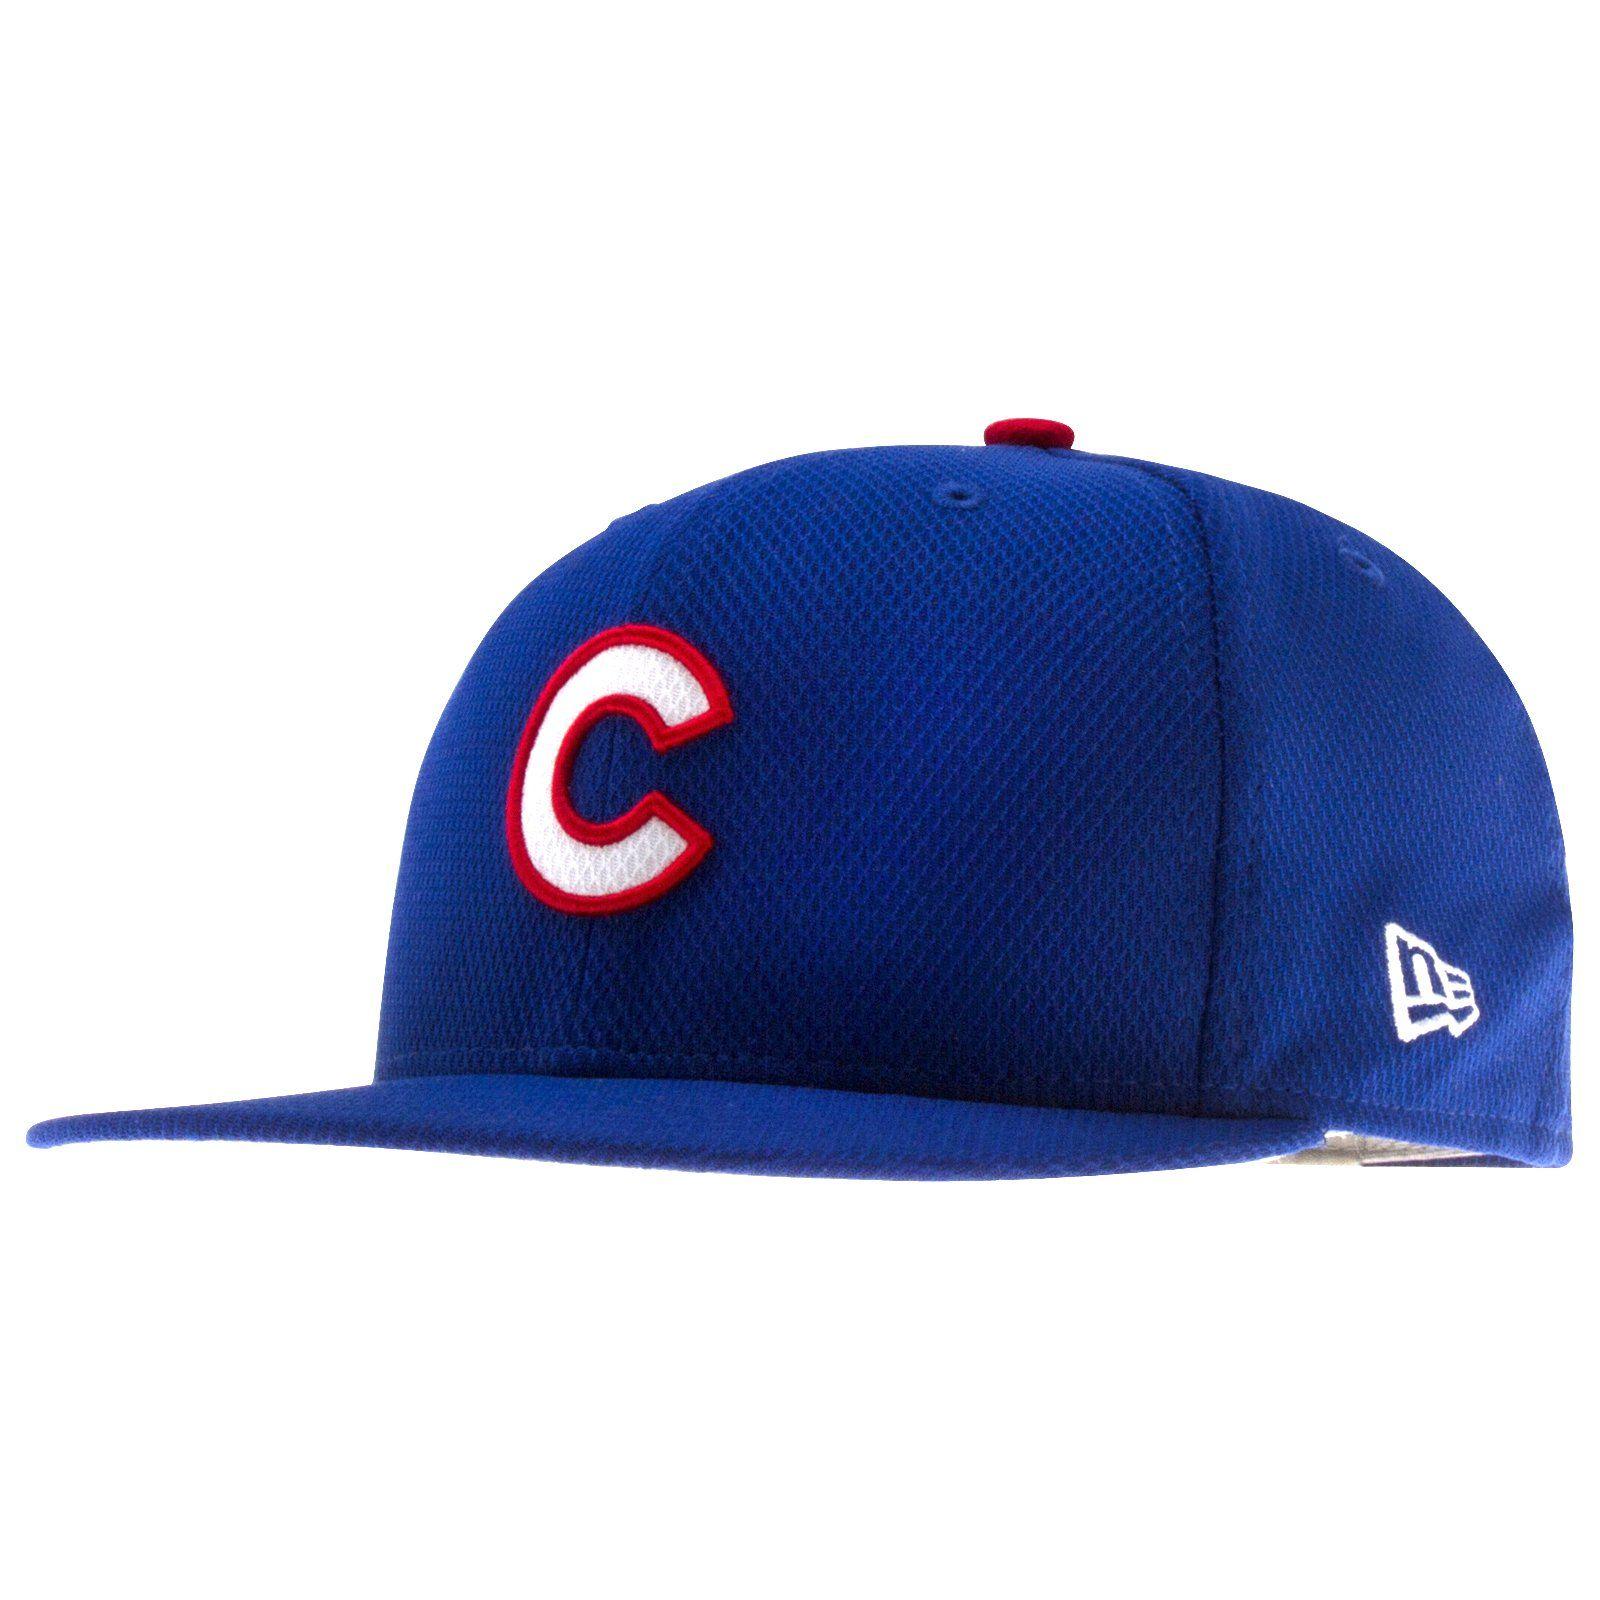 White and Red C Logo - Chicago Cubs Royal with White and Red C Logo 2017 Batting Practice